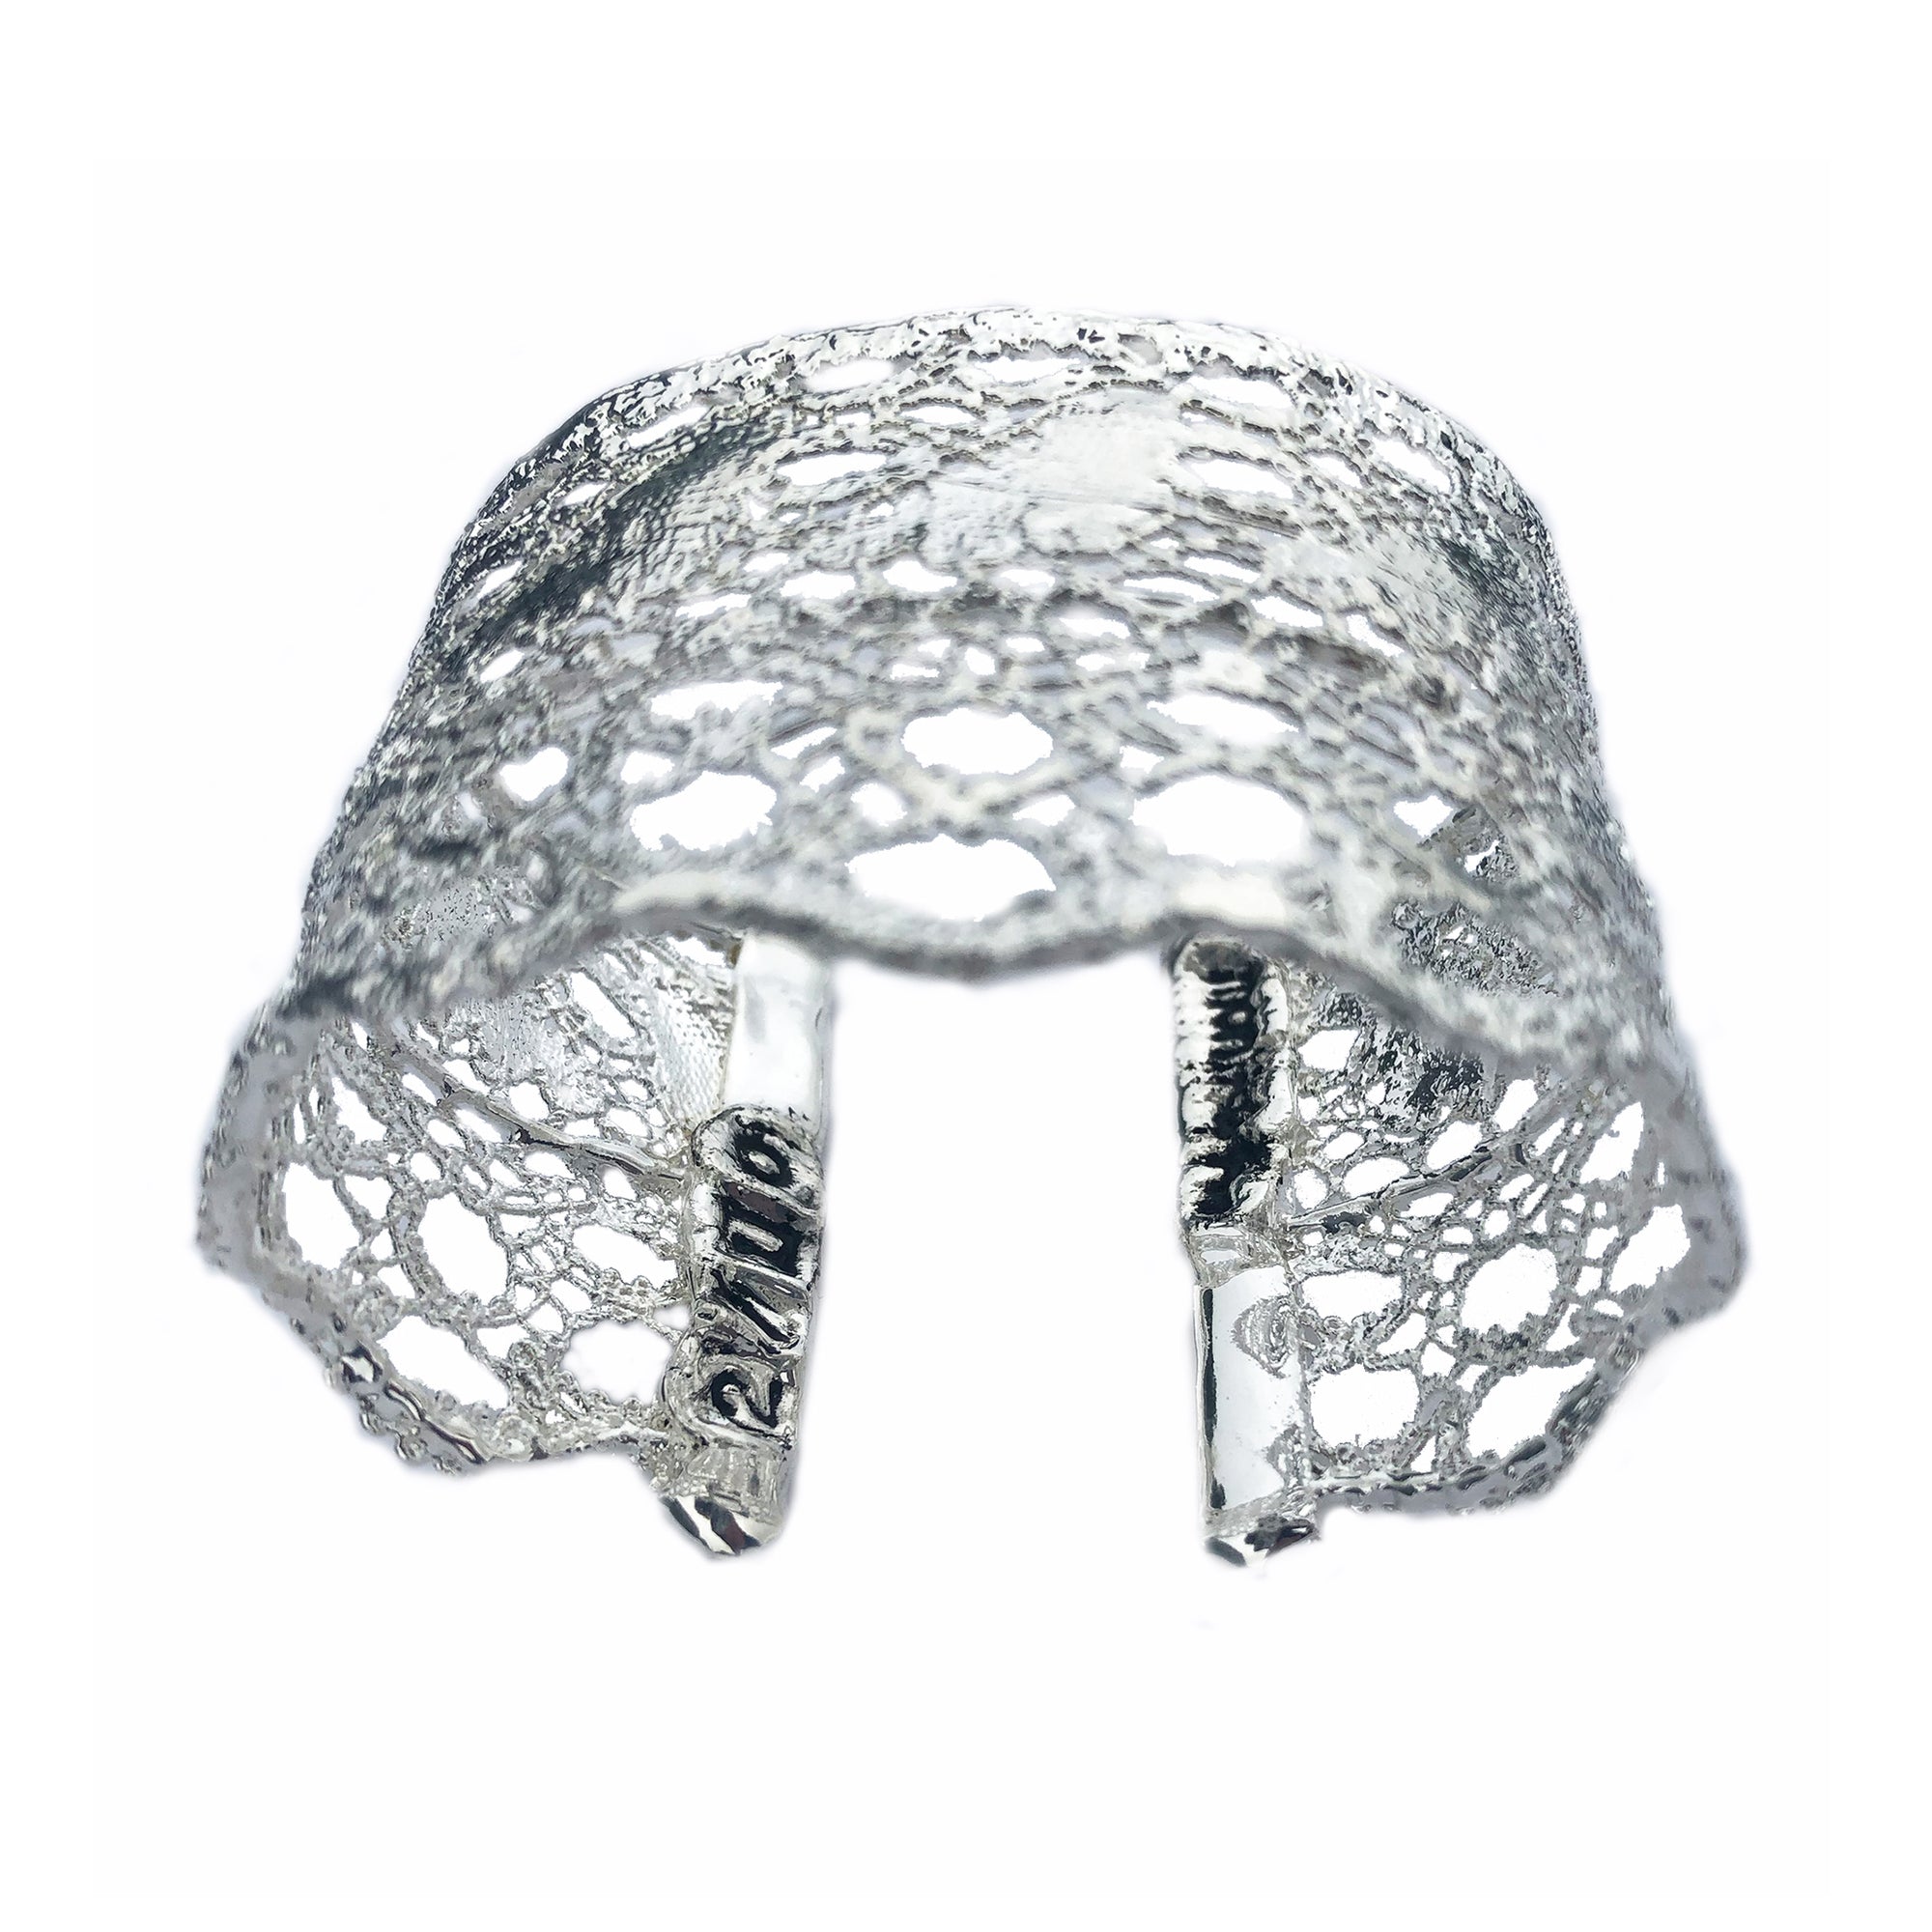 Rare silver cuff bracelet made from Swedish Vadstena lace from late 1800s, limited edition of 10.